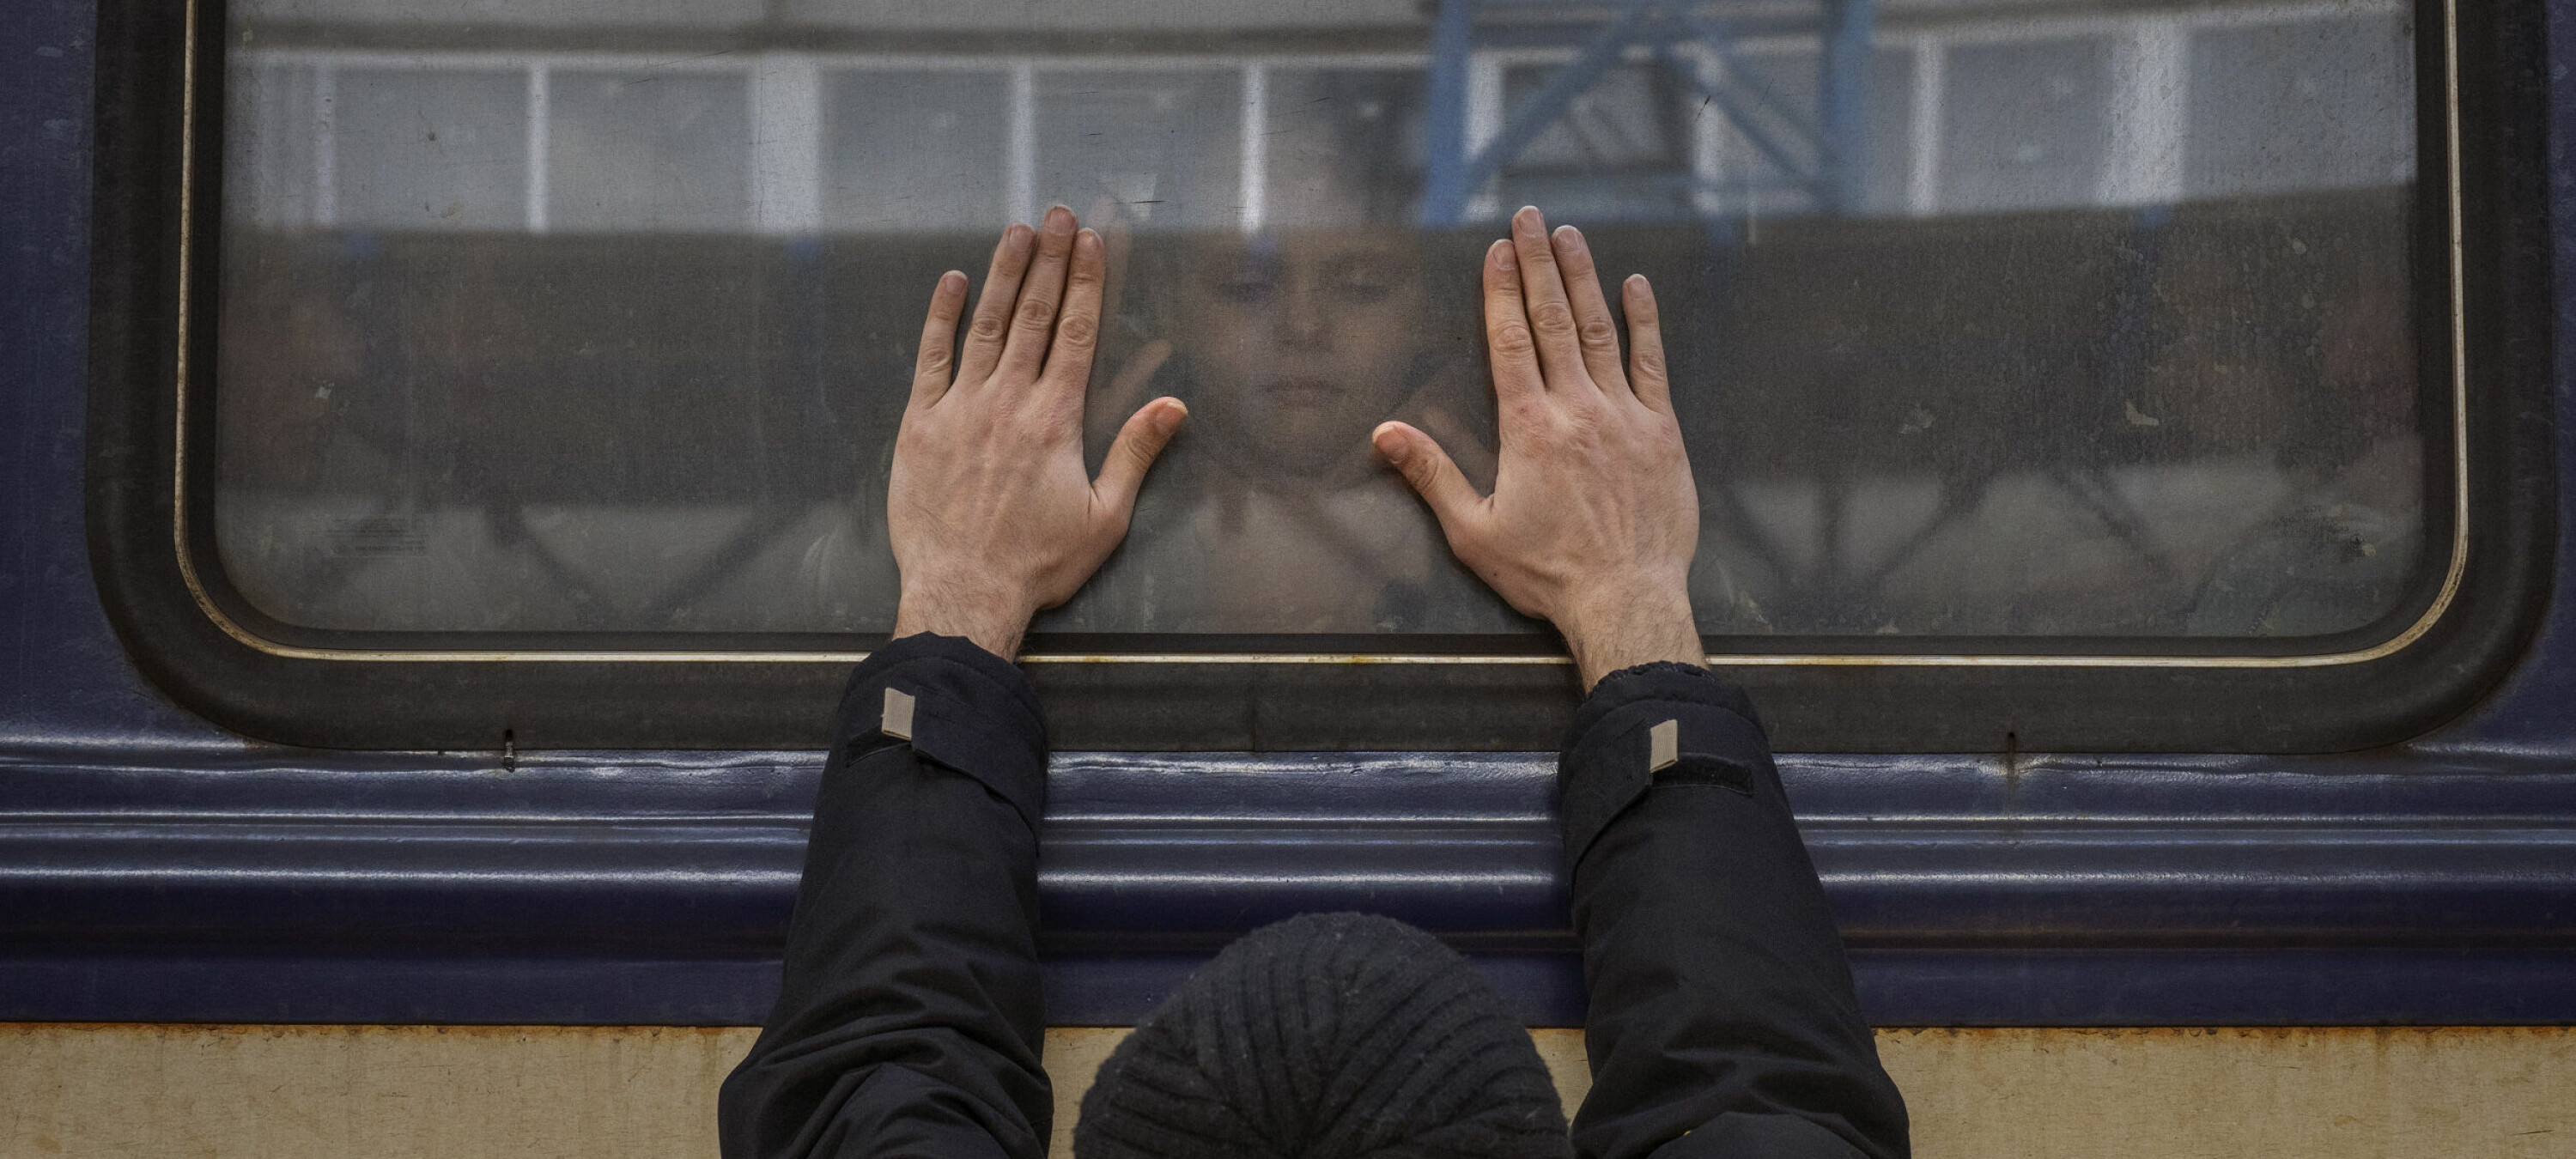 FILE - Aleksander, 41, presses his palms against the window as he says goodbye to his daughter Anna, 5, on a train to Lviv at the Kyiv station, Ukraine, Friday, March 4. 2022. Aleksander has to stay behind to fight in the war while his family leaves the country to seek refuge in a neighbouring country. (AP Photo/Emilio Morenatti, File)